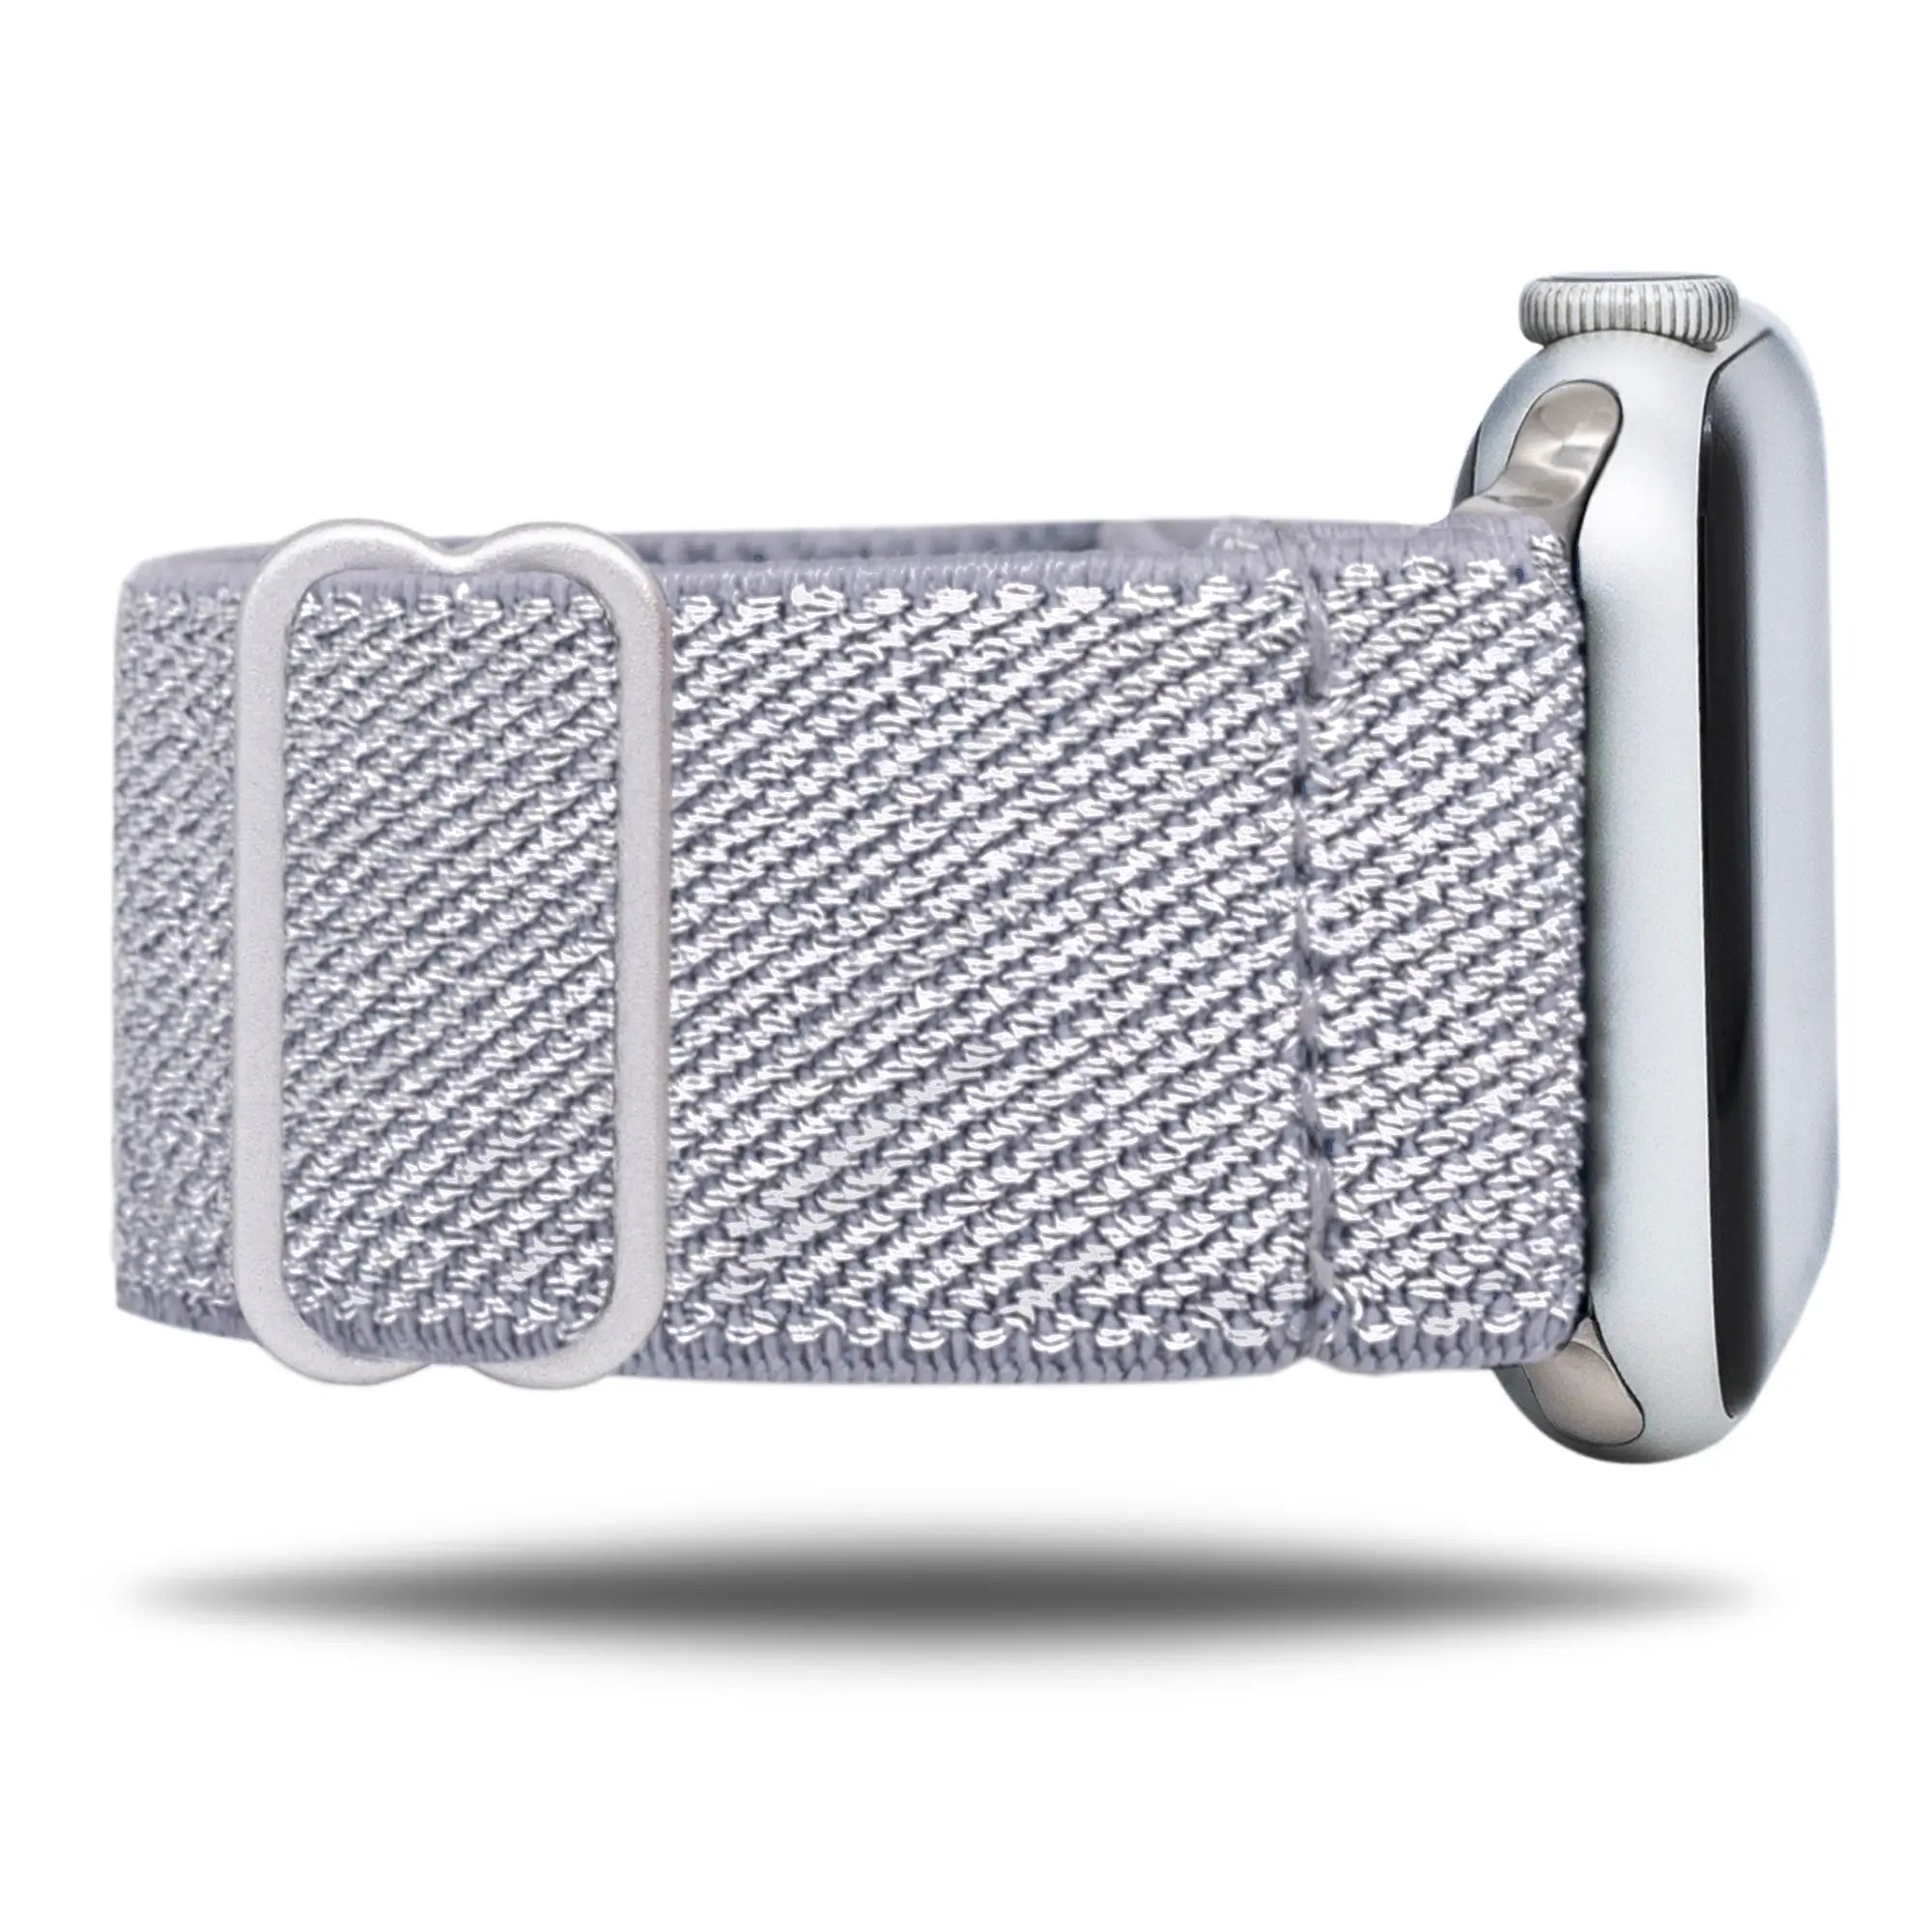 Revolver Braxley Apple Watch Band in best sellers section